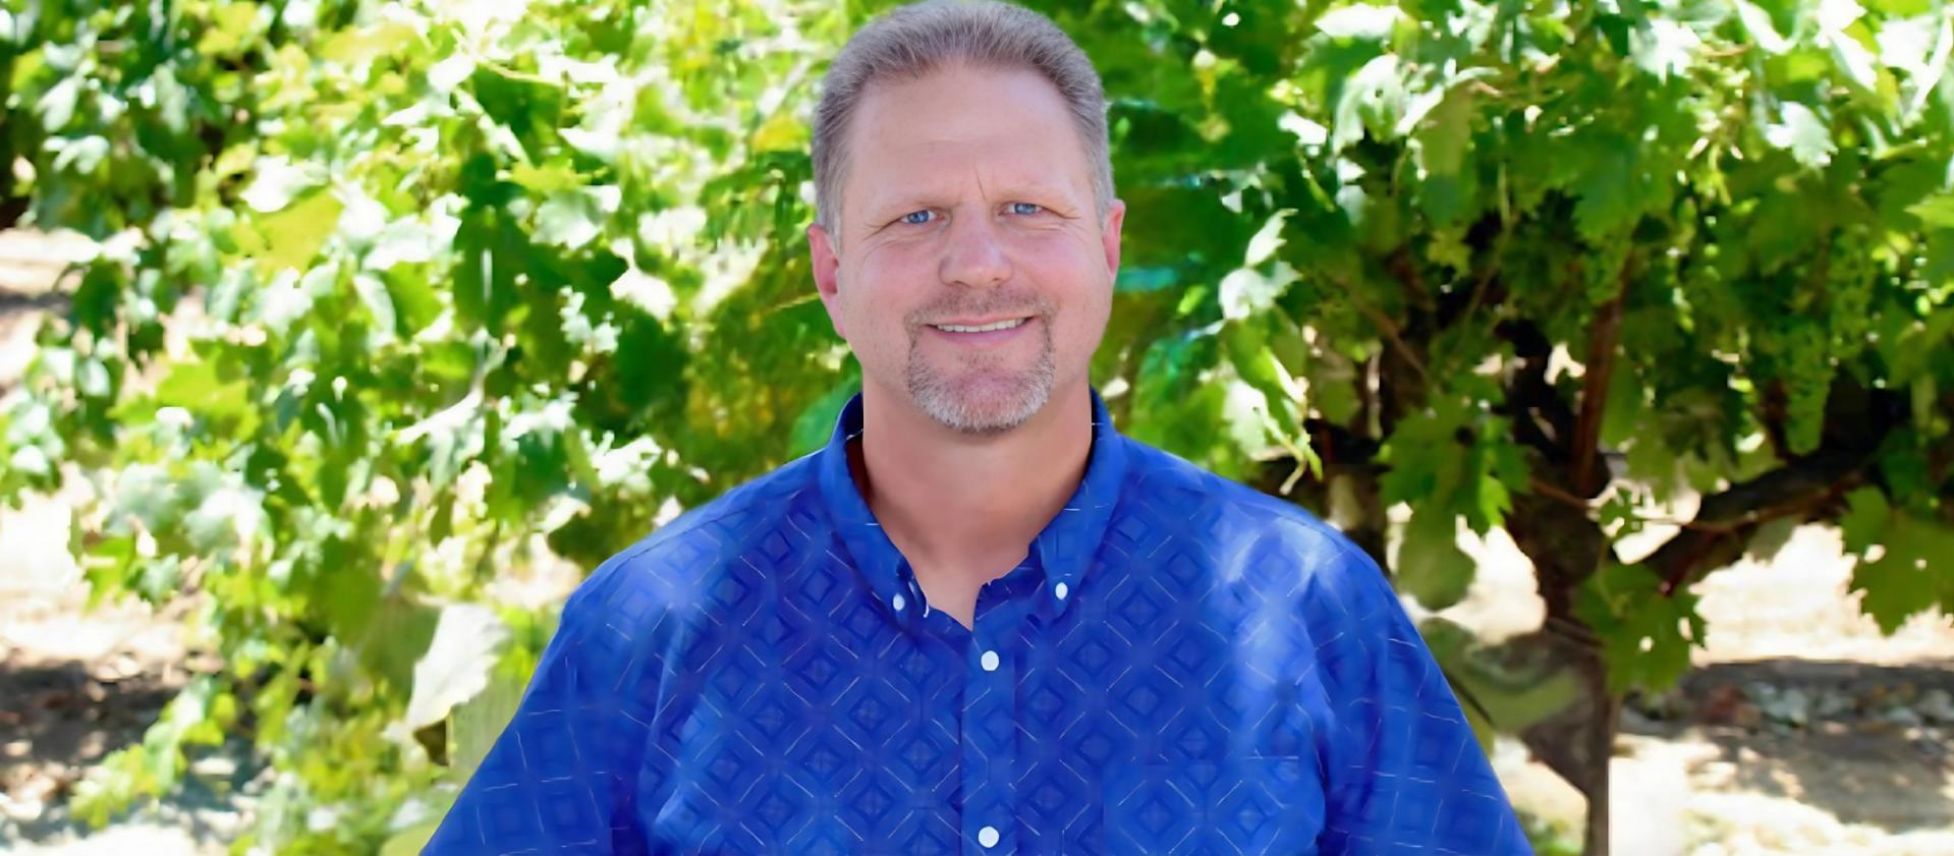 Photo for: Inside Allied Grape Growers: President Jeff Bitter on Cooperative Advantages and Industry Stability